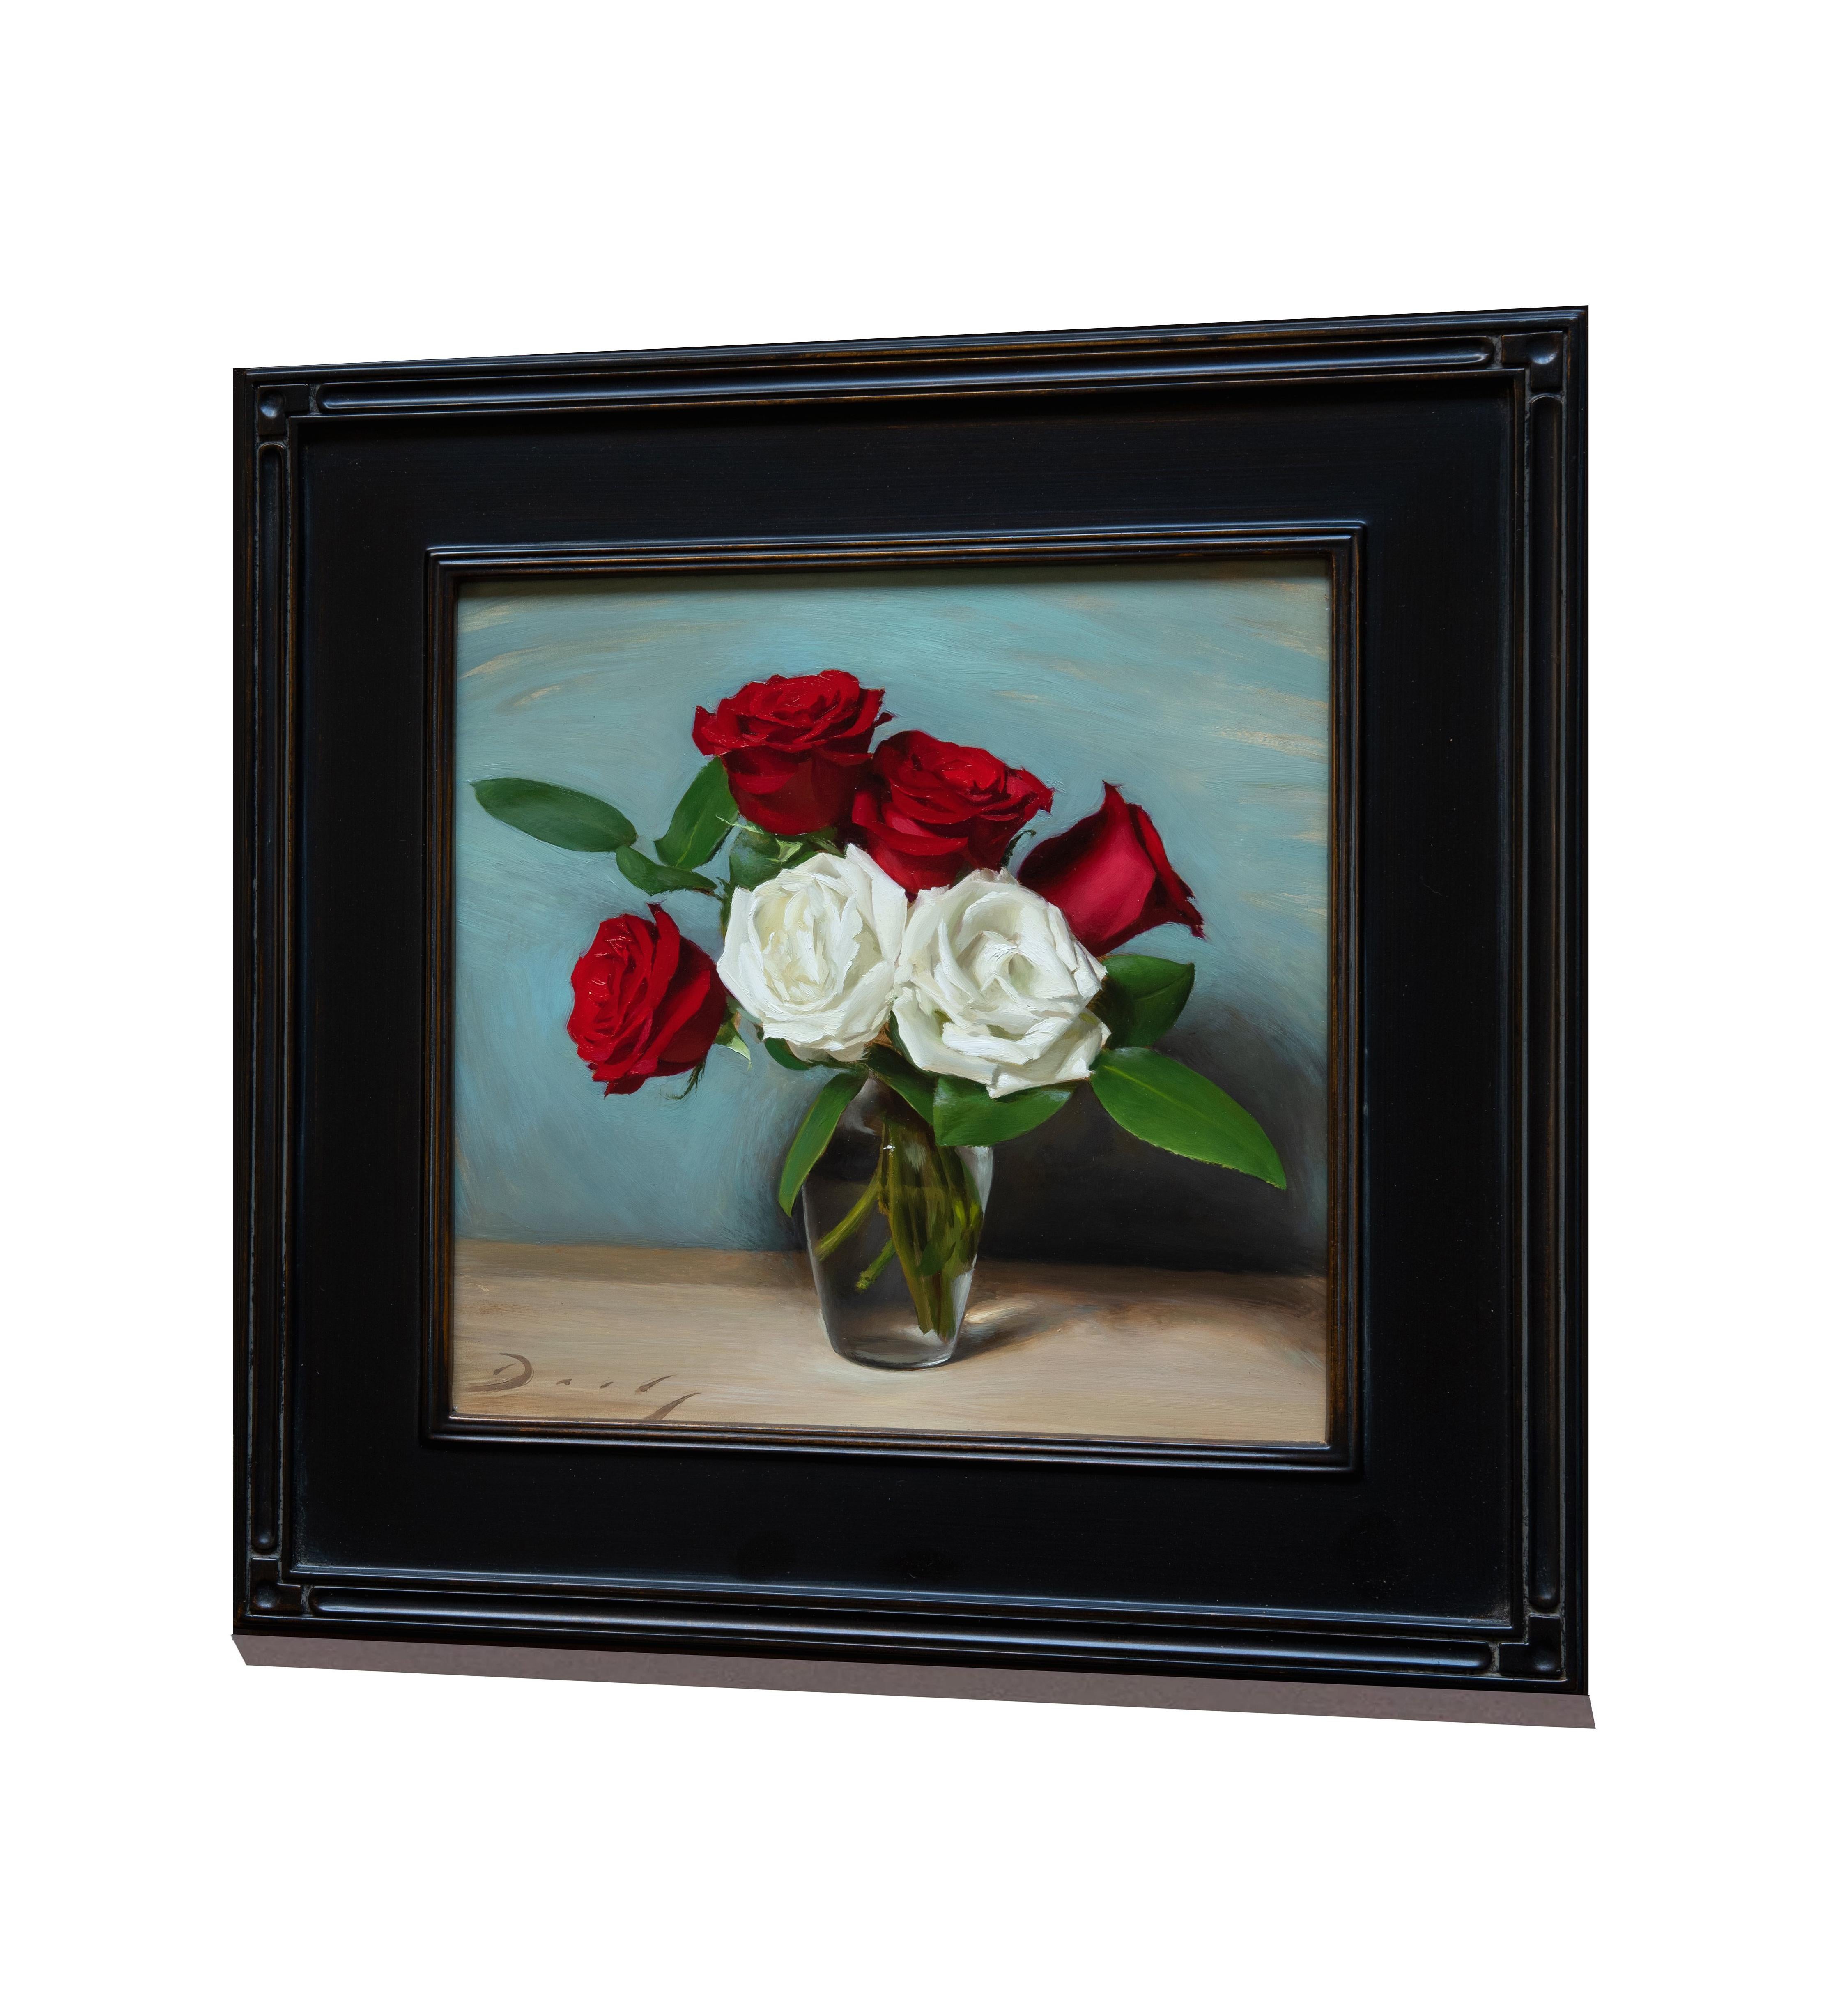 Realist still-life with red and white roses, 